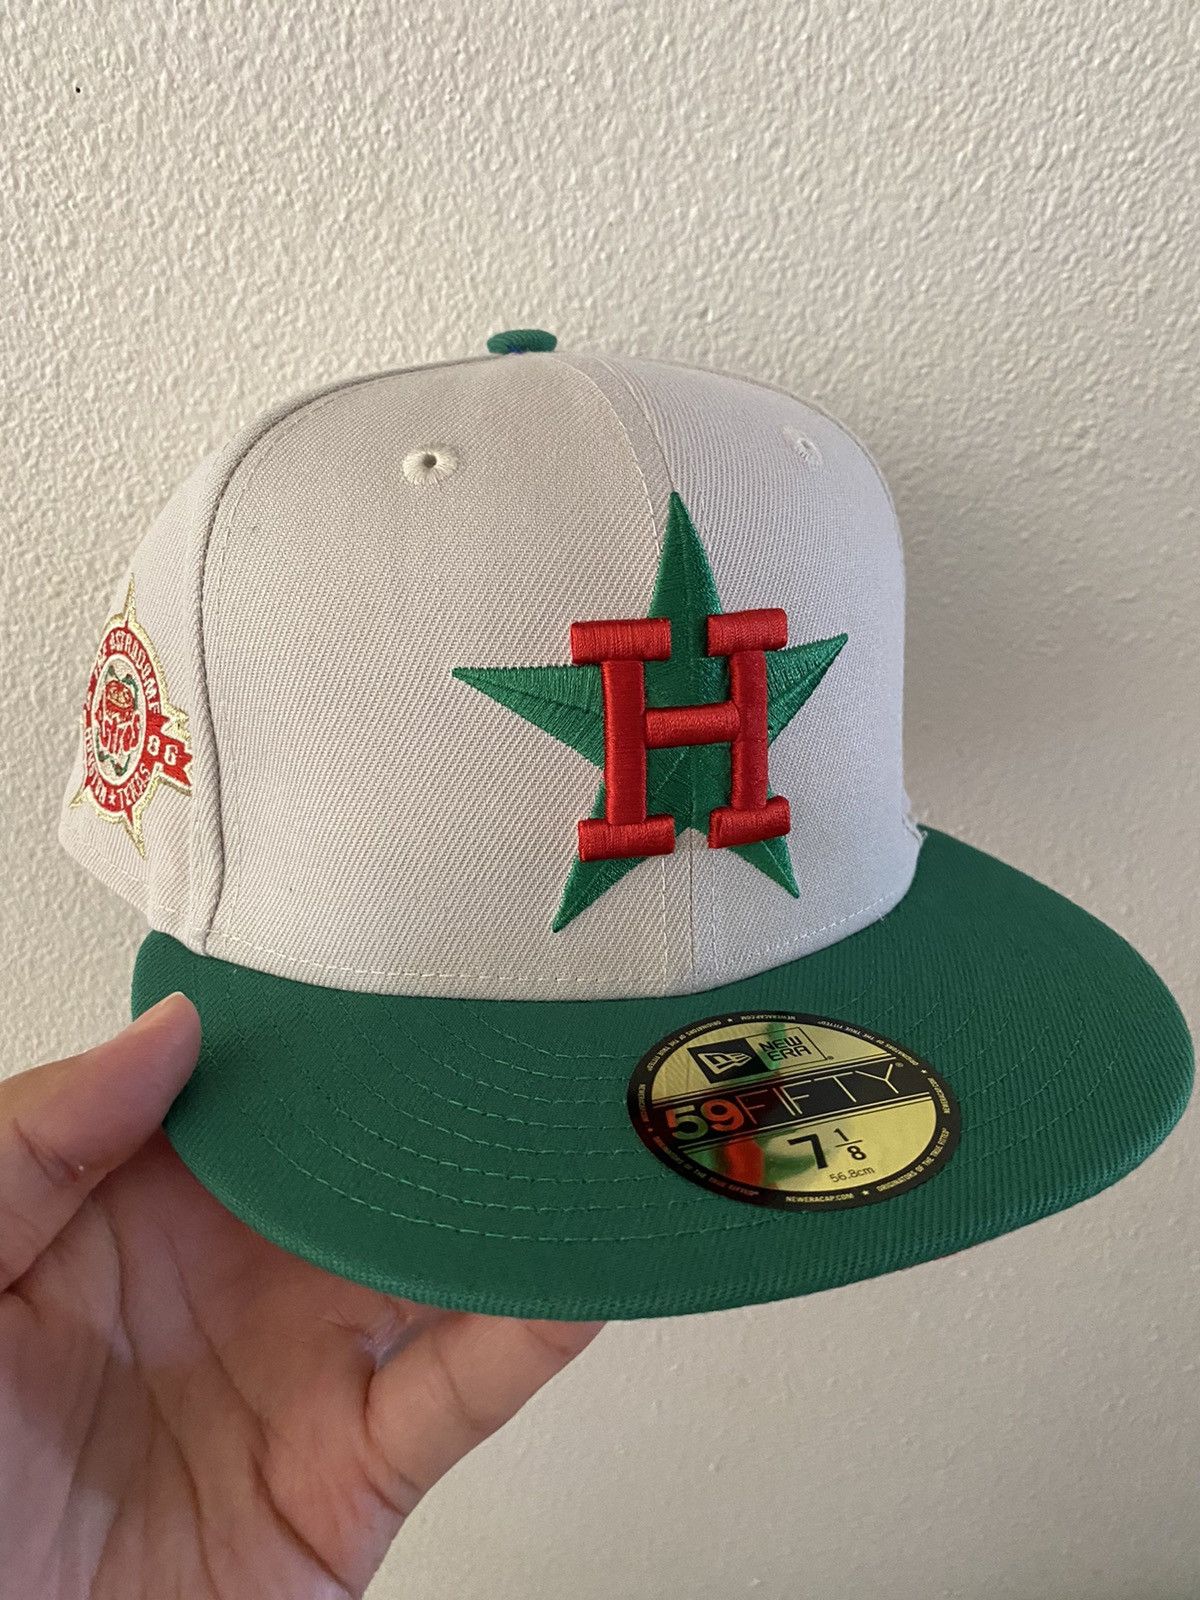 New Era Houston Astros Astrodome 1986 Hops Edition 59Fifty Fitted Hat, EXCLUSIVE HATS, CAPS